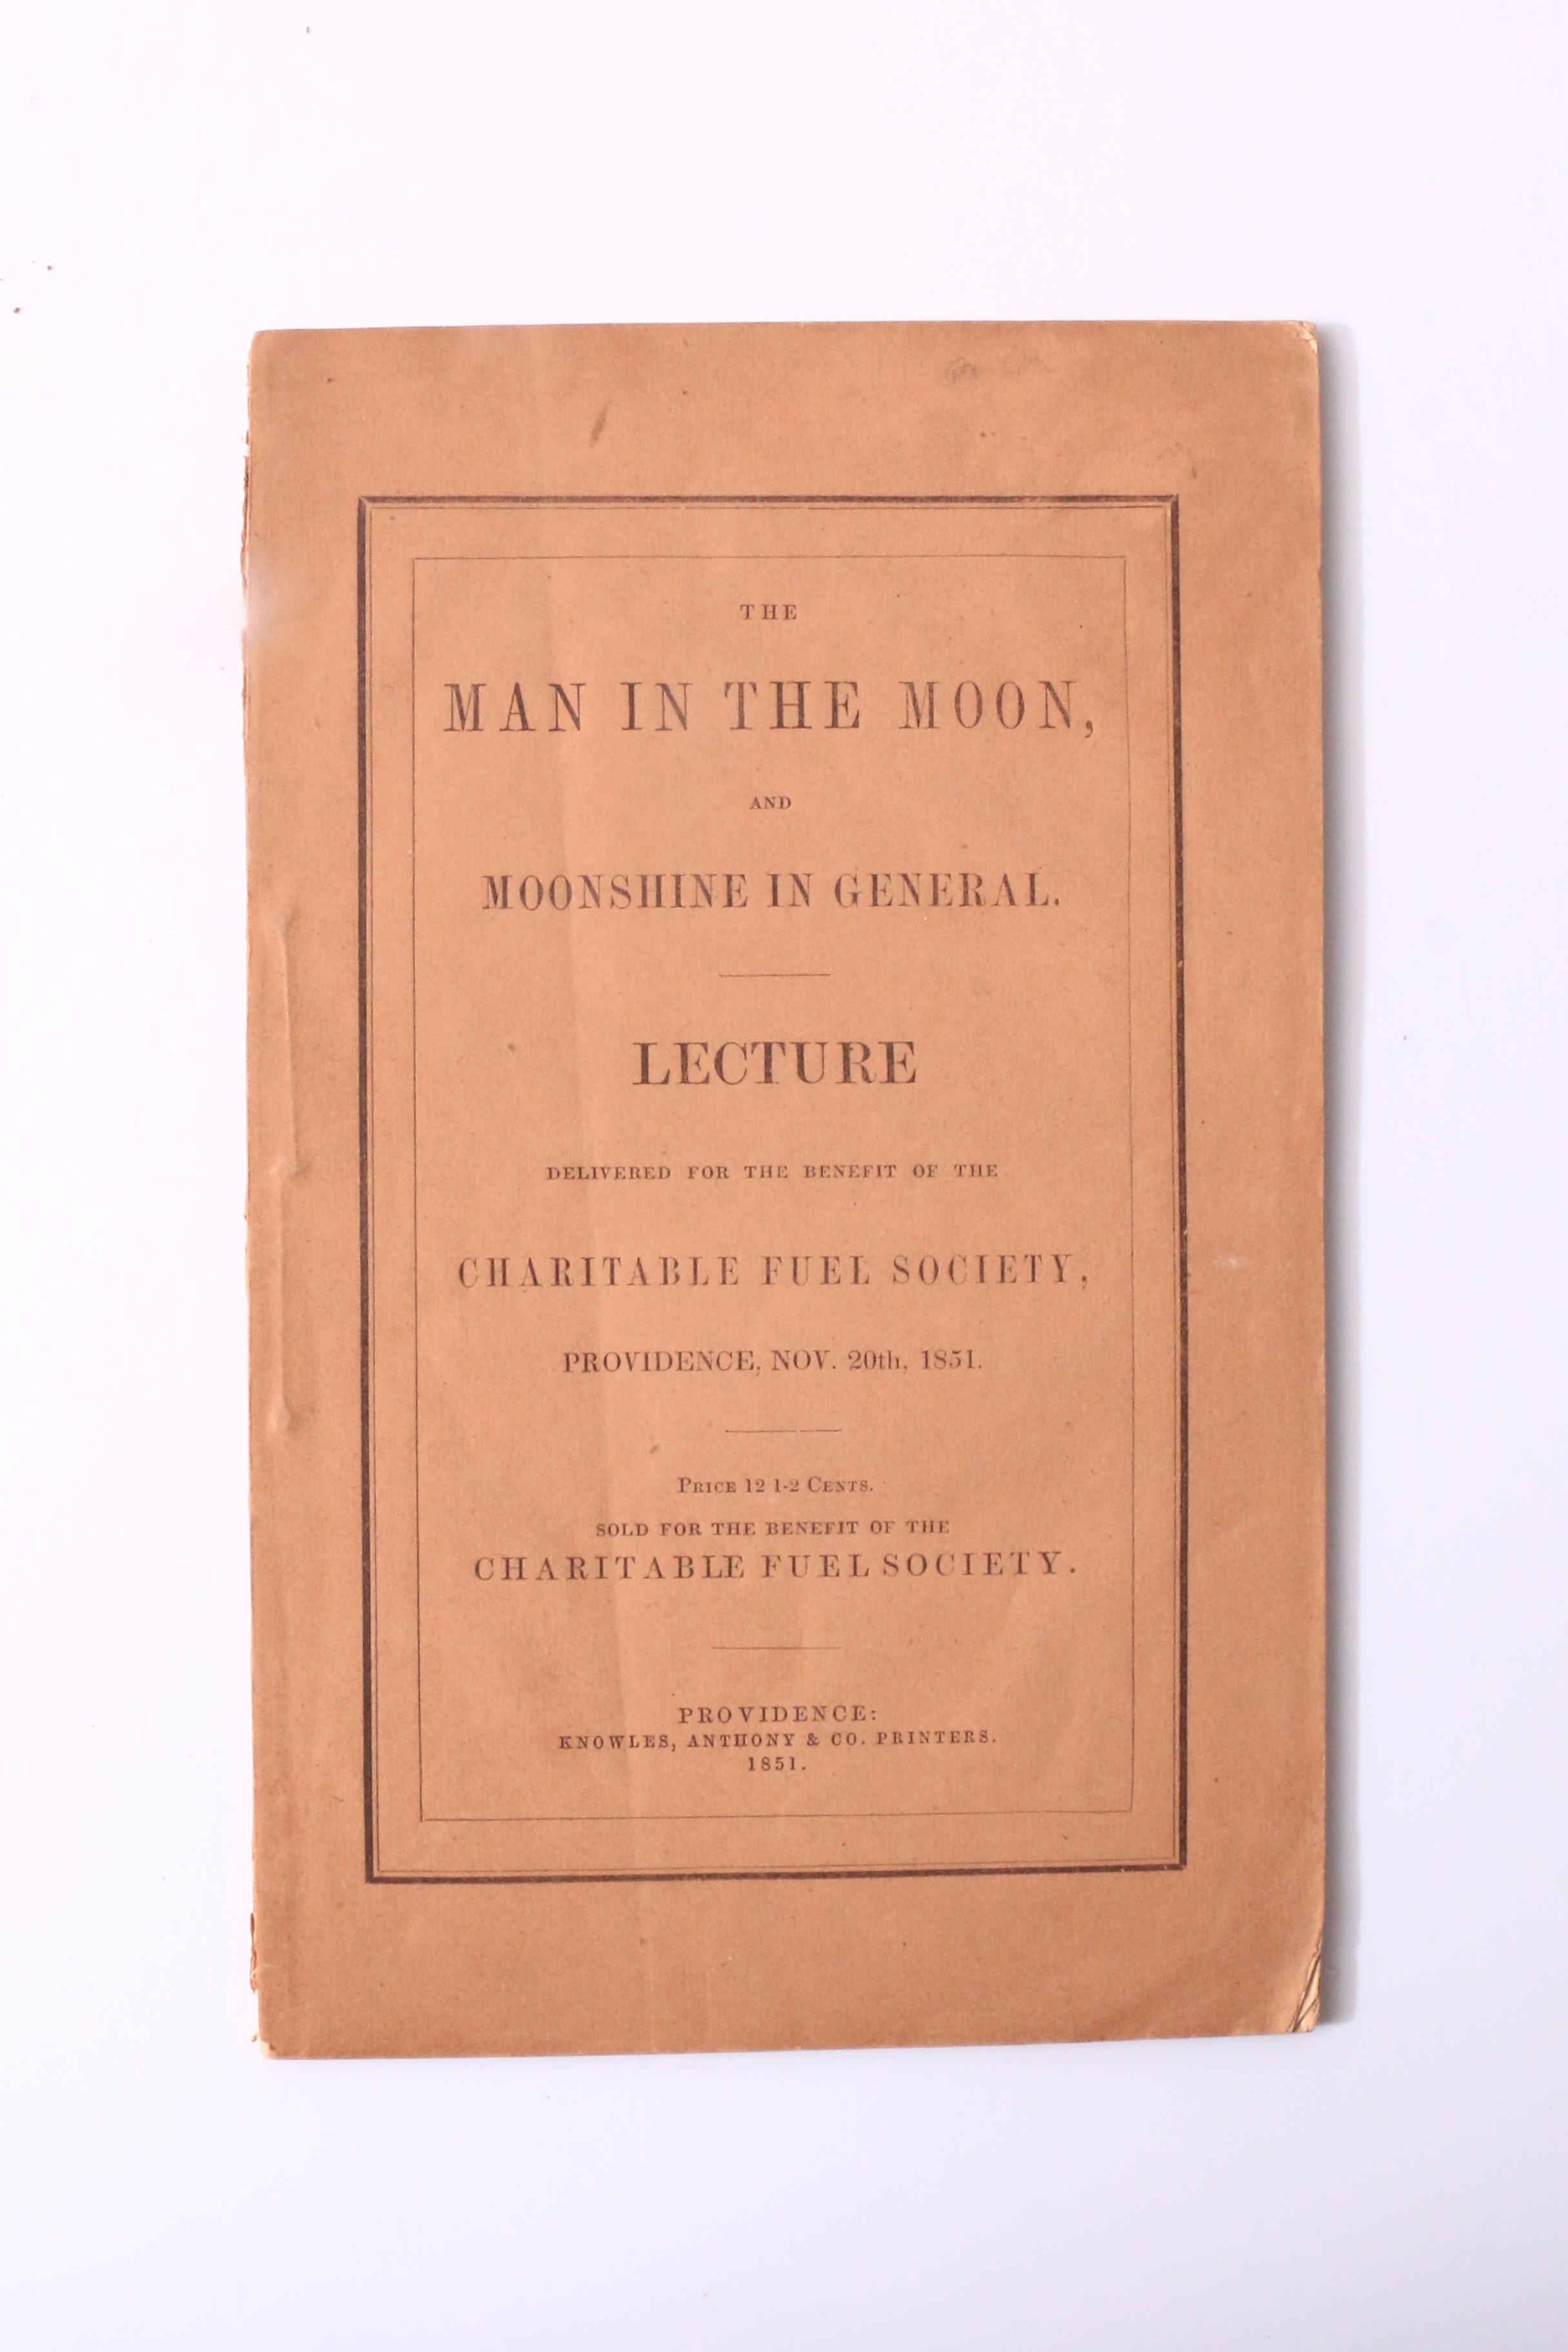 C.A. Alder - The Man in the Moon, and Moonshine in General. Lecture Delivered for the Benefit of the Charitable Fuel Society, Providence, Nov, 20th, 1851 - Knowles, Anthony & Co., 1851, First Edition.